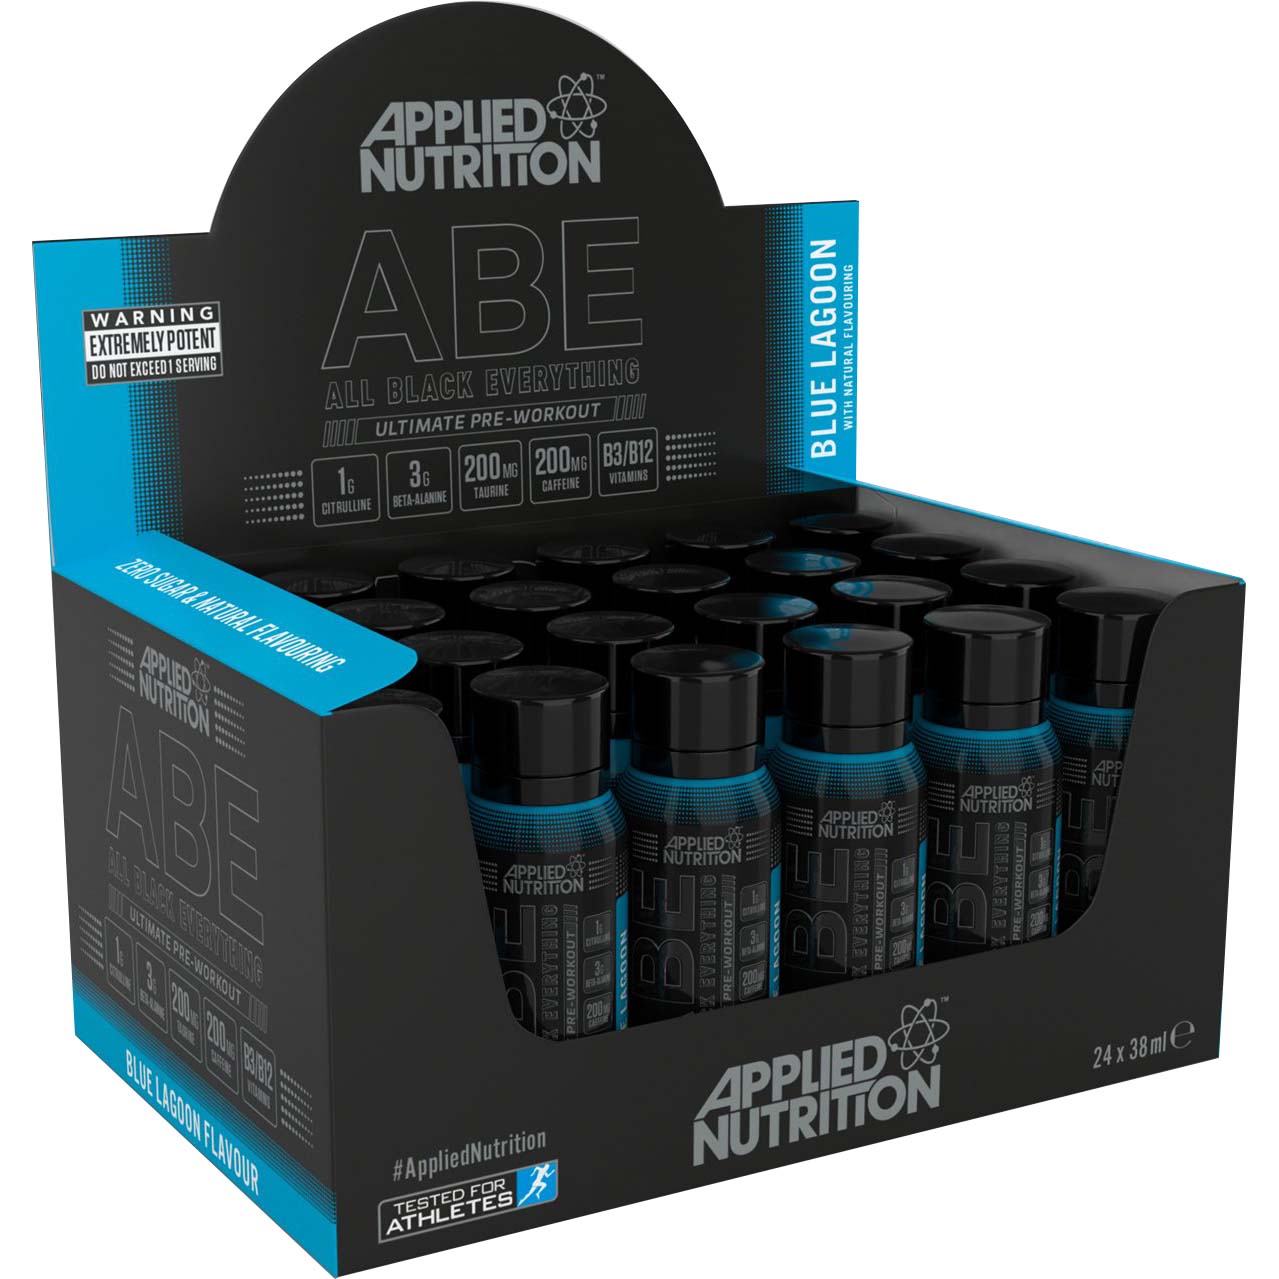 Applied Nutrition ABE Ultimate Pre Workout Shot 24 Shots Blue Lagoon